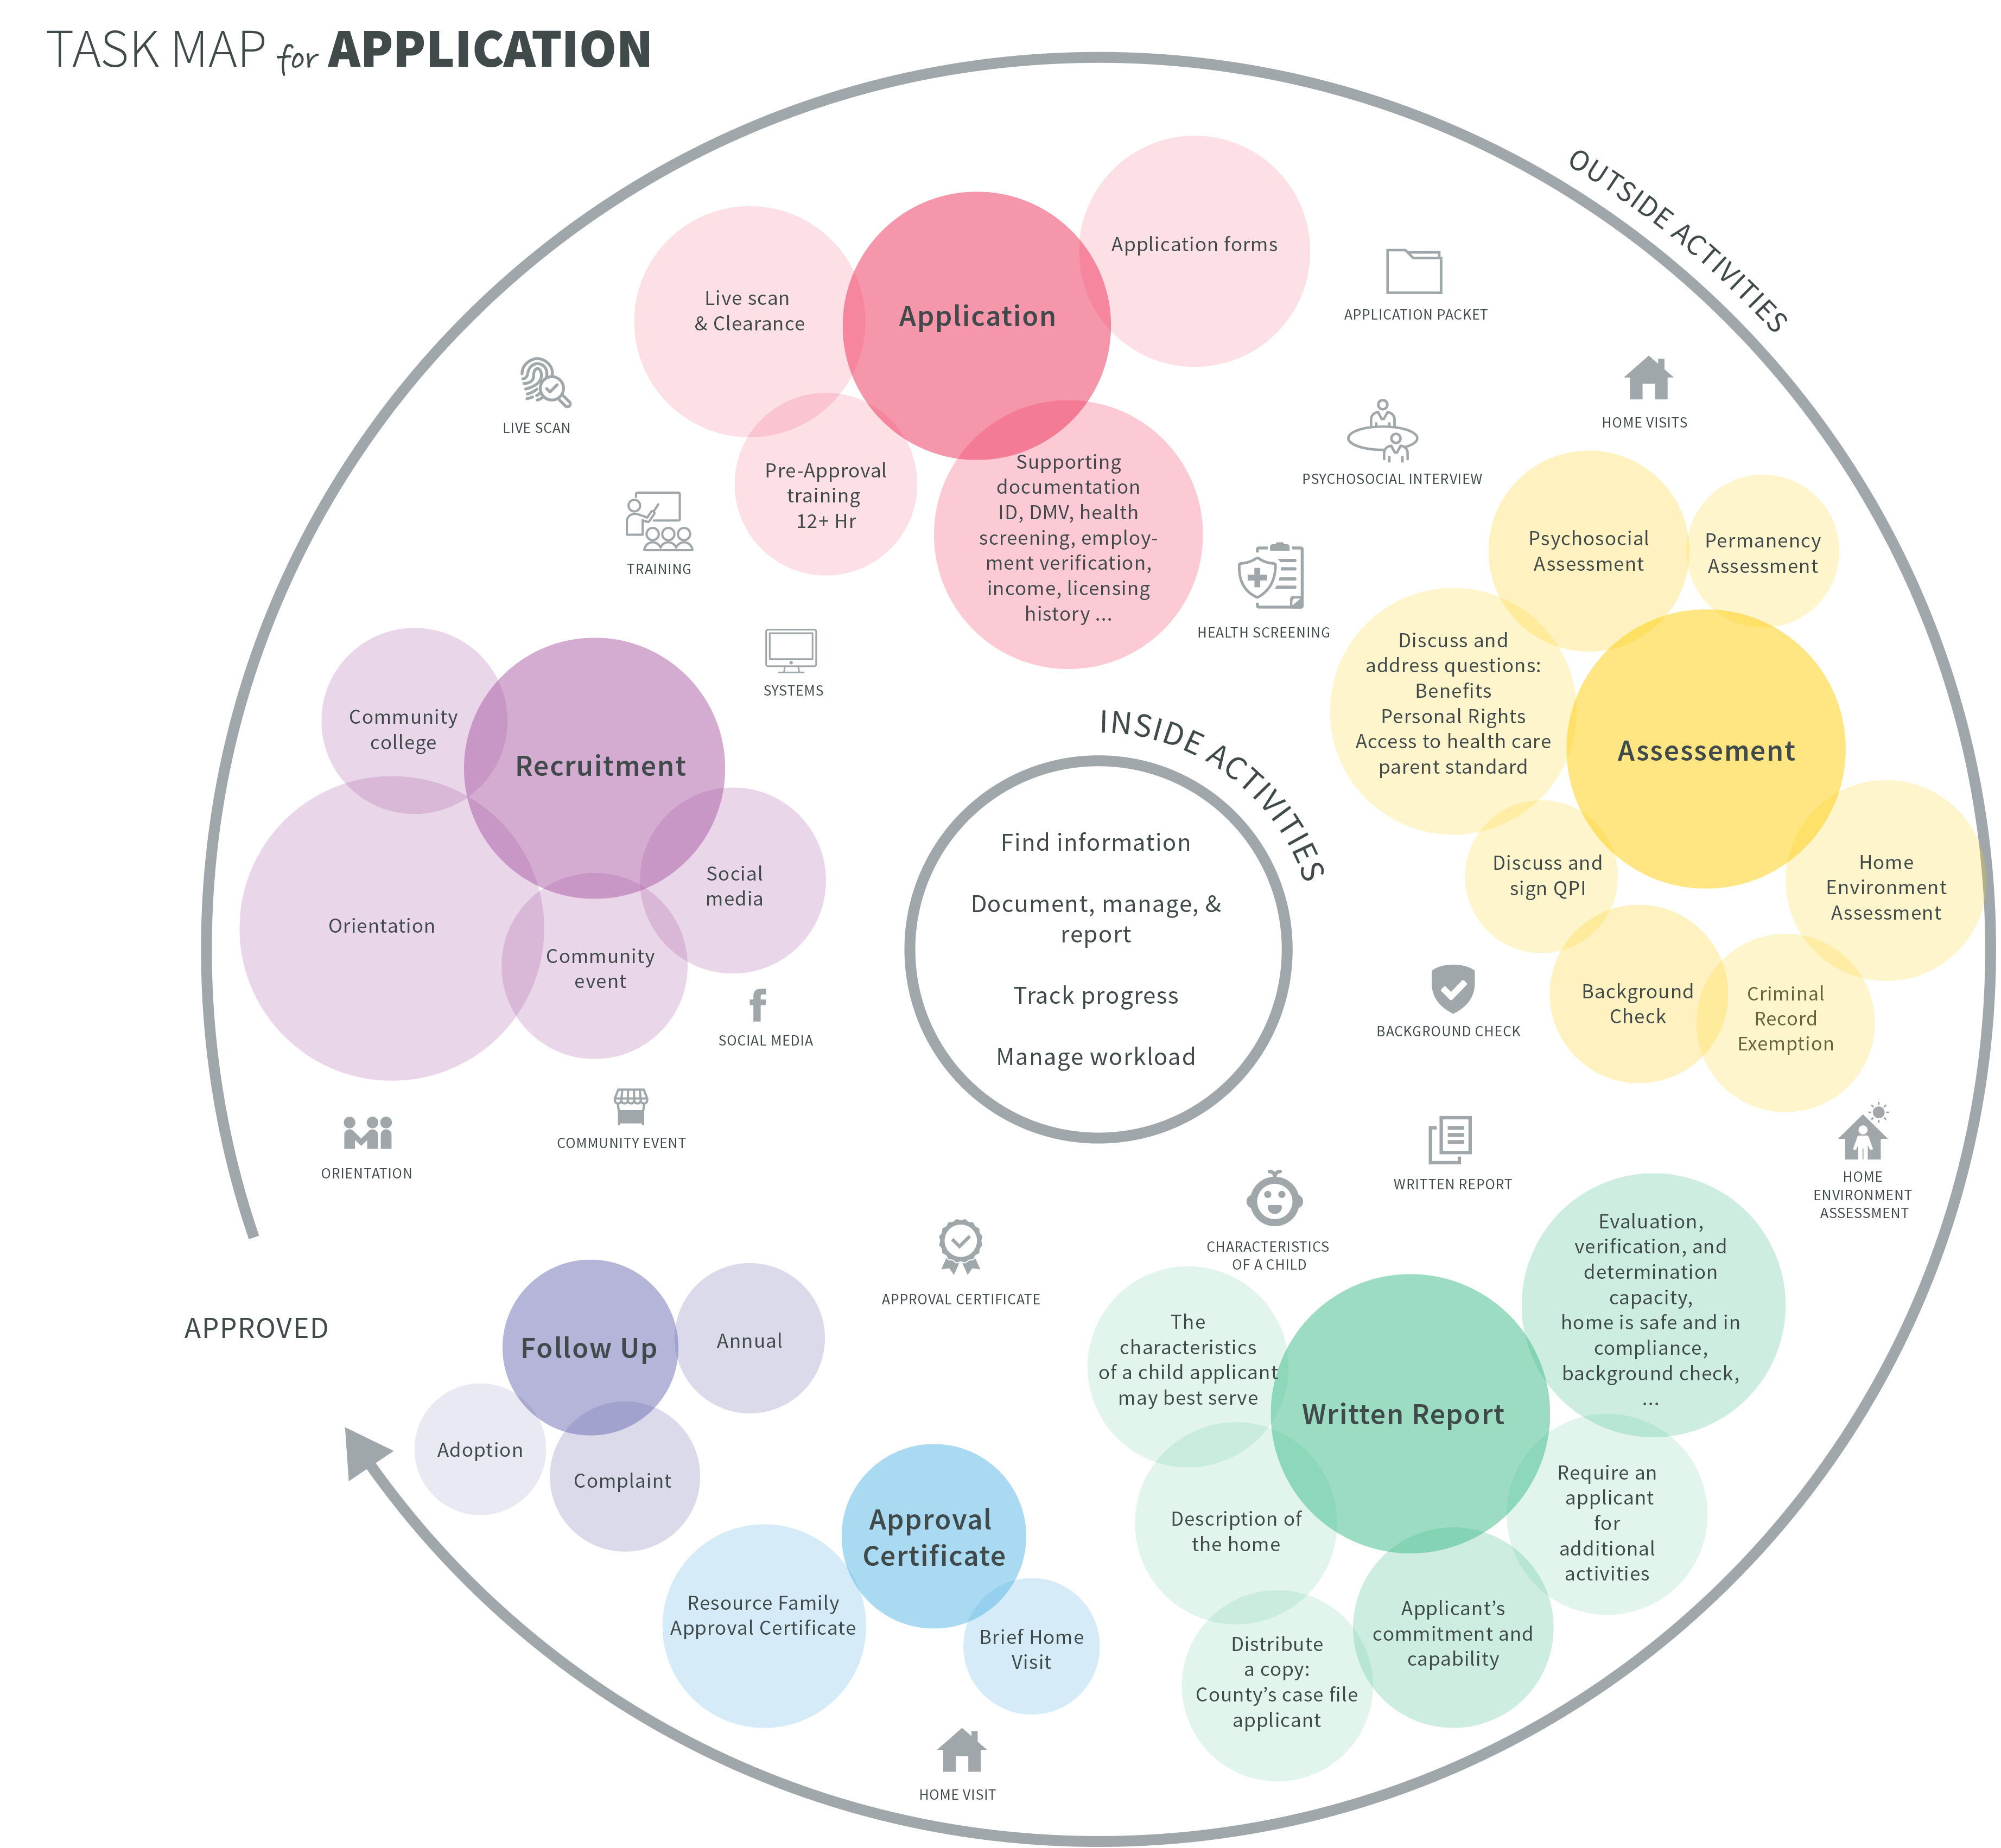 Task Map for RFA Application, by Liz Lin